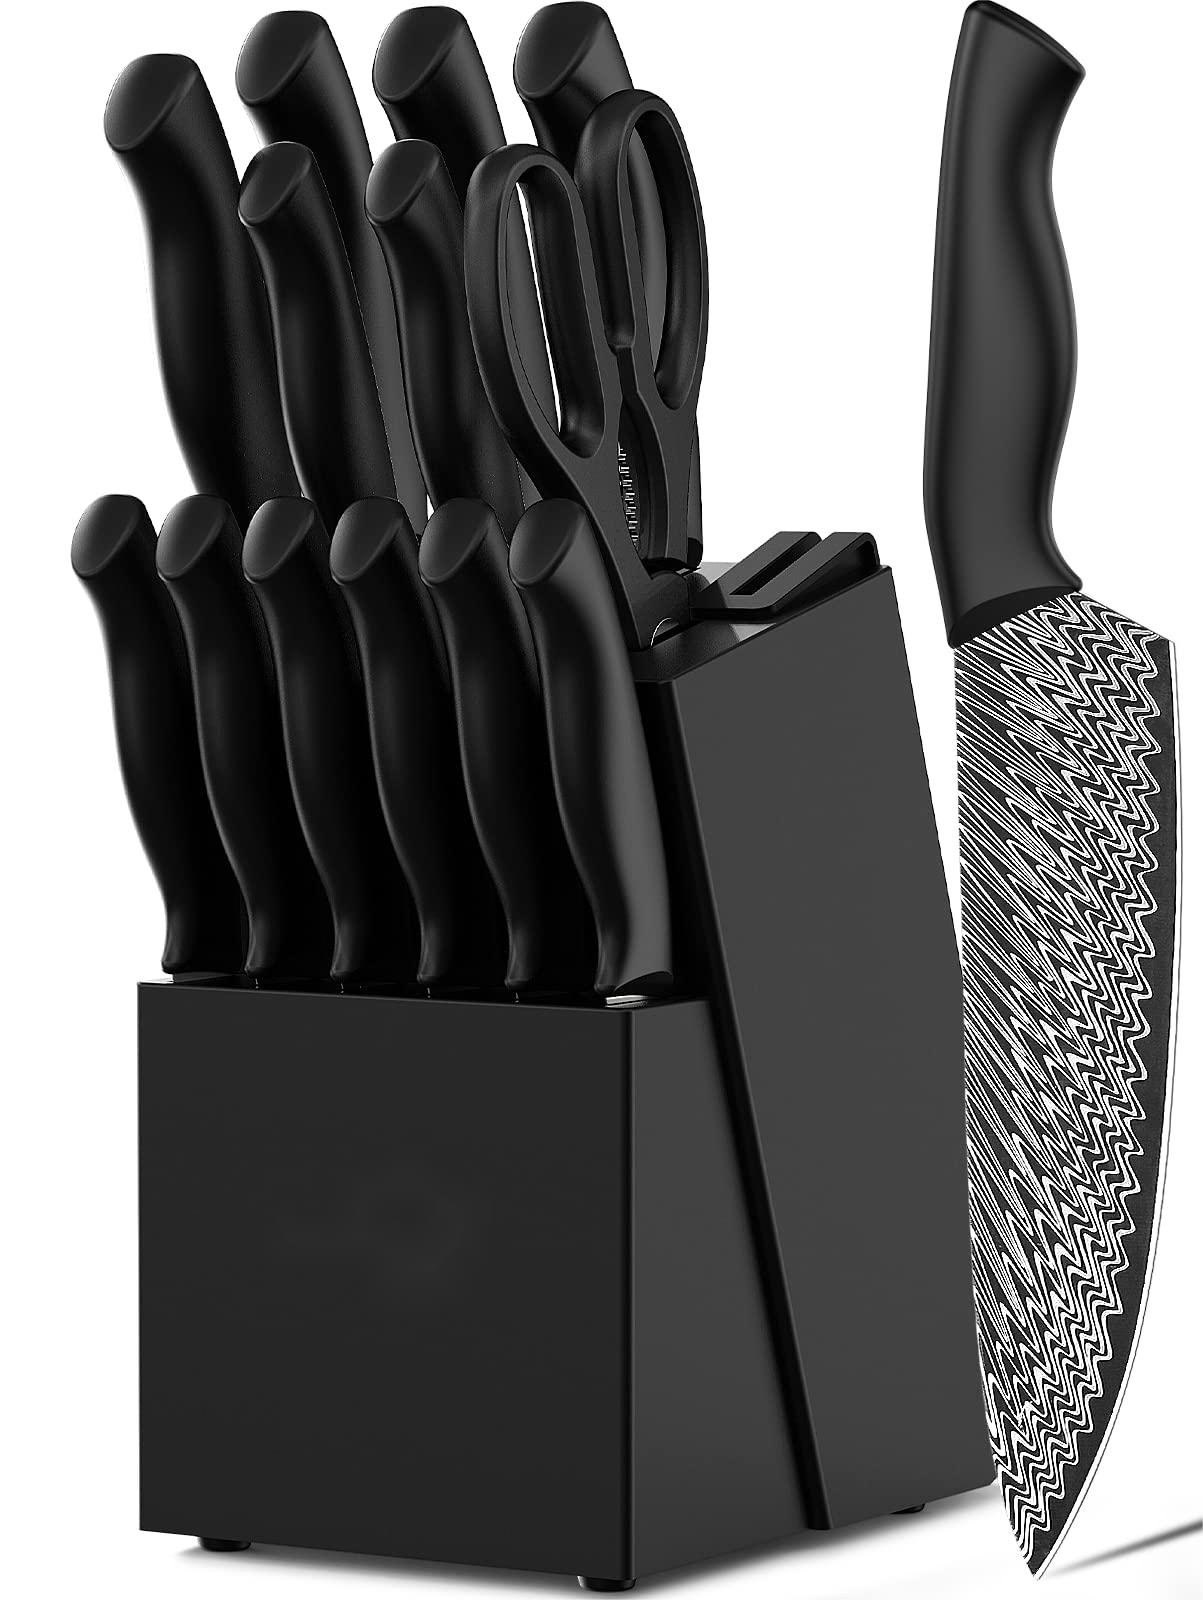 Sabatier 15-Piece Forged Stainless Steel Knife Block Set, High-Carbon  Stainless Steel Kitchen Knives, Razor-Sharp Knife set with Acacia Wood  Block